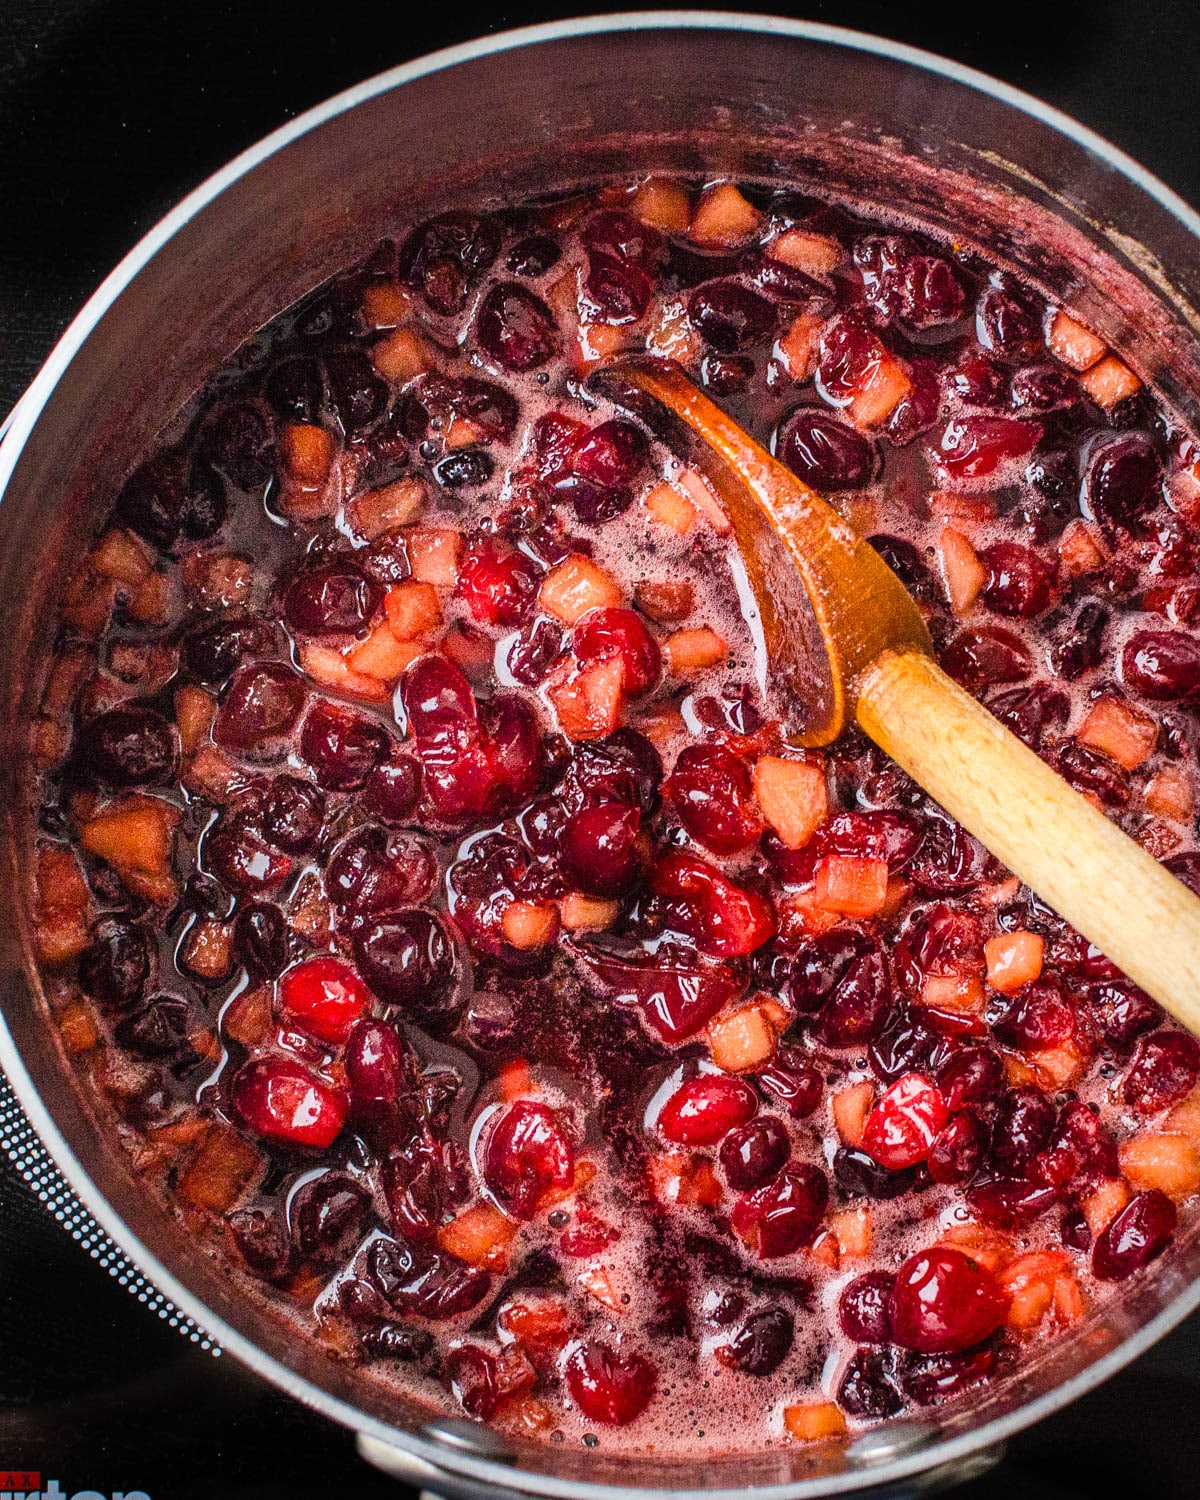 Cooking the apples and cranberries until the berries burst.